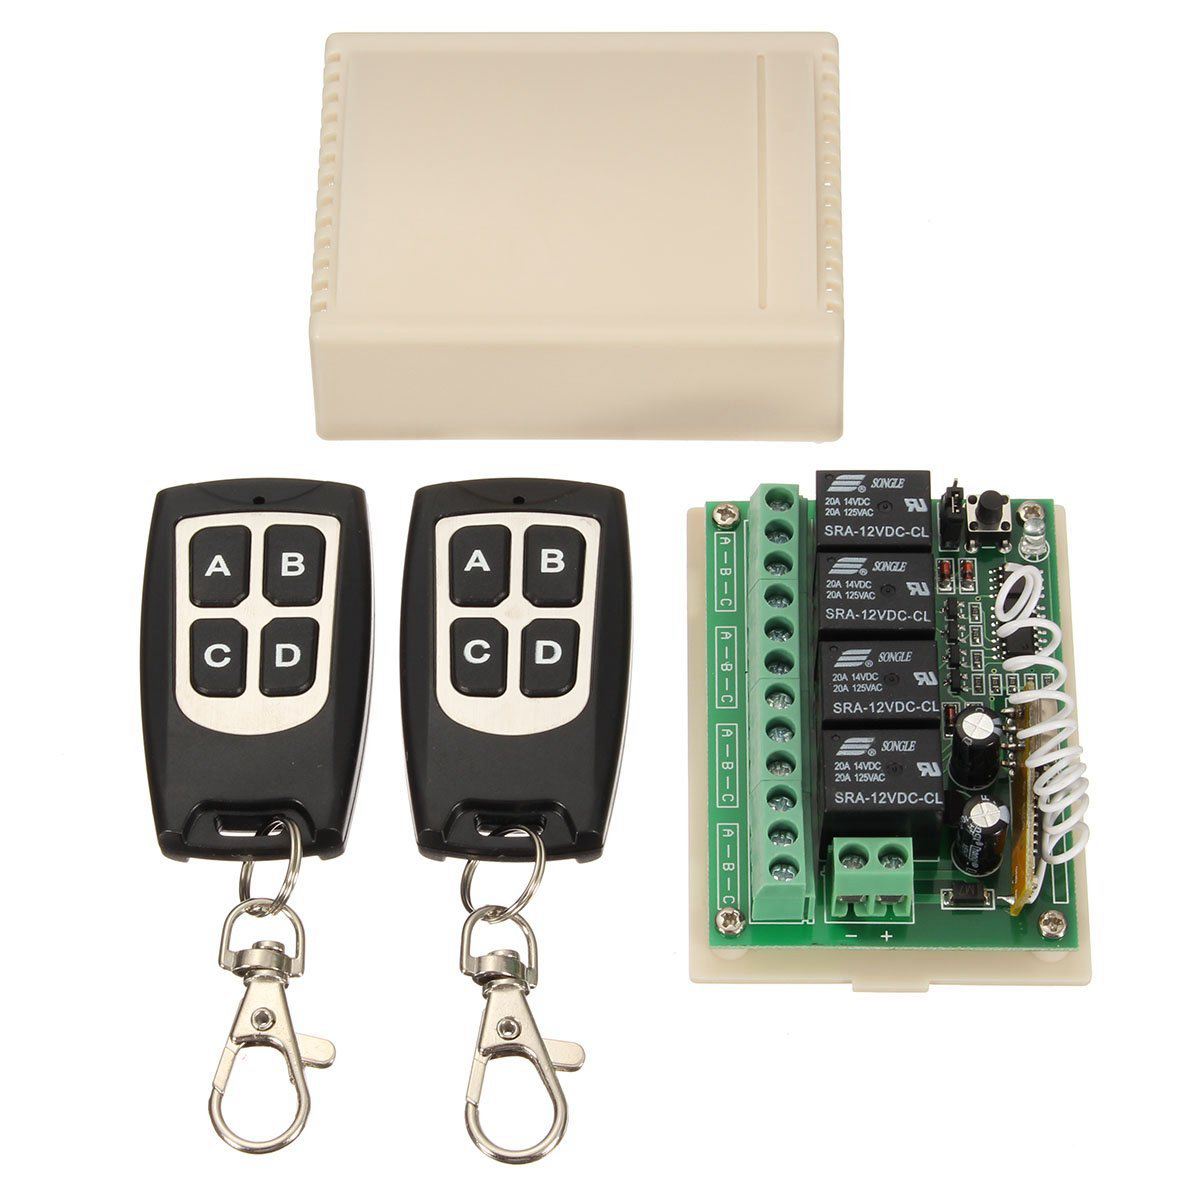 12V 4CH Channel 433Mhz Wireless Remote Control Switch Integrated Circuit with 2 Transmitter DIY Replace Parts Tool Kits 24V